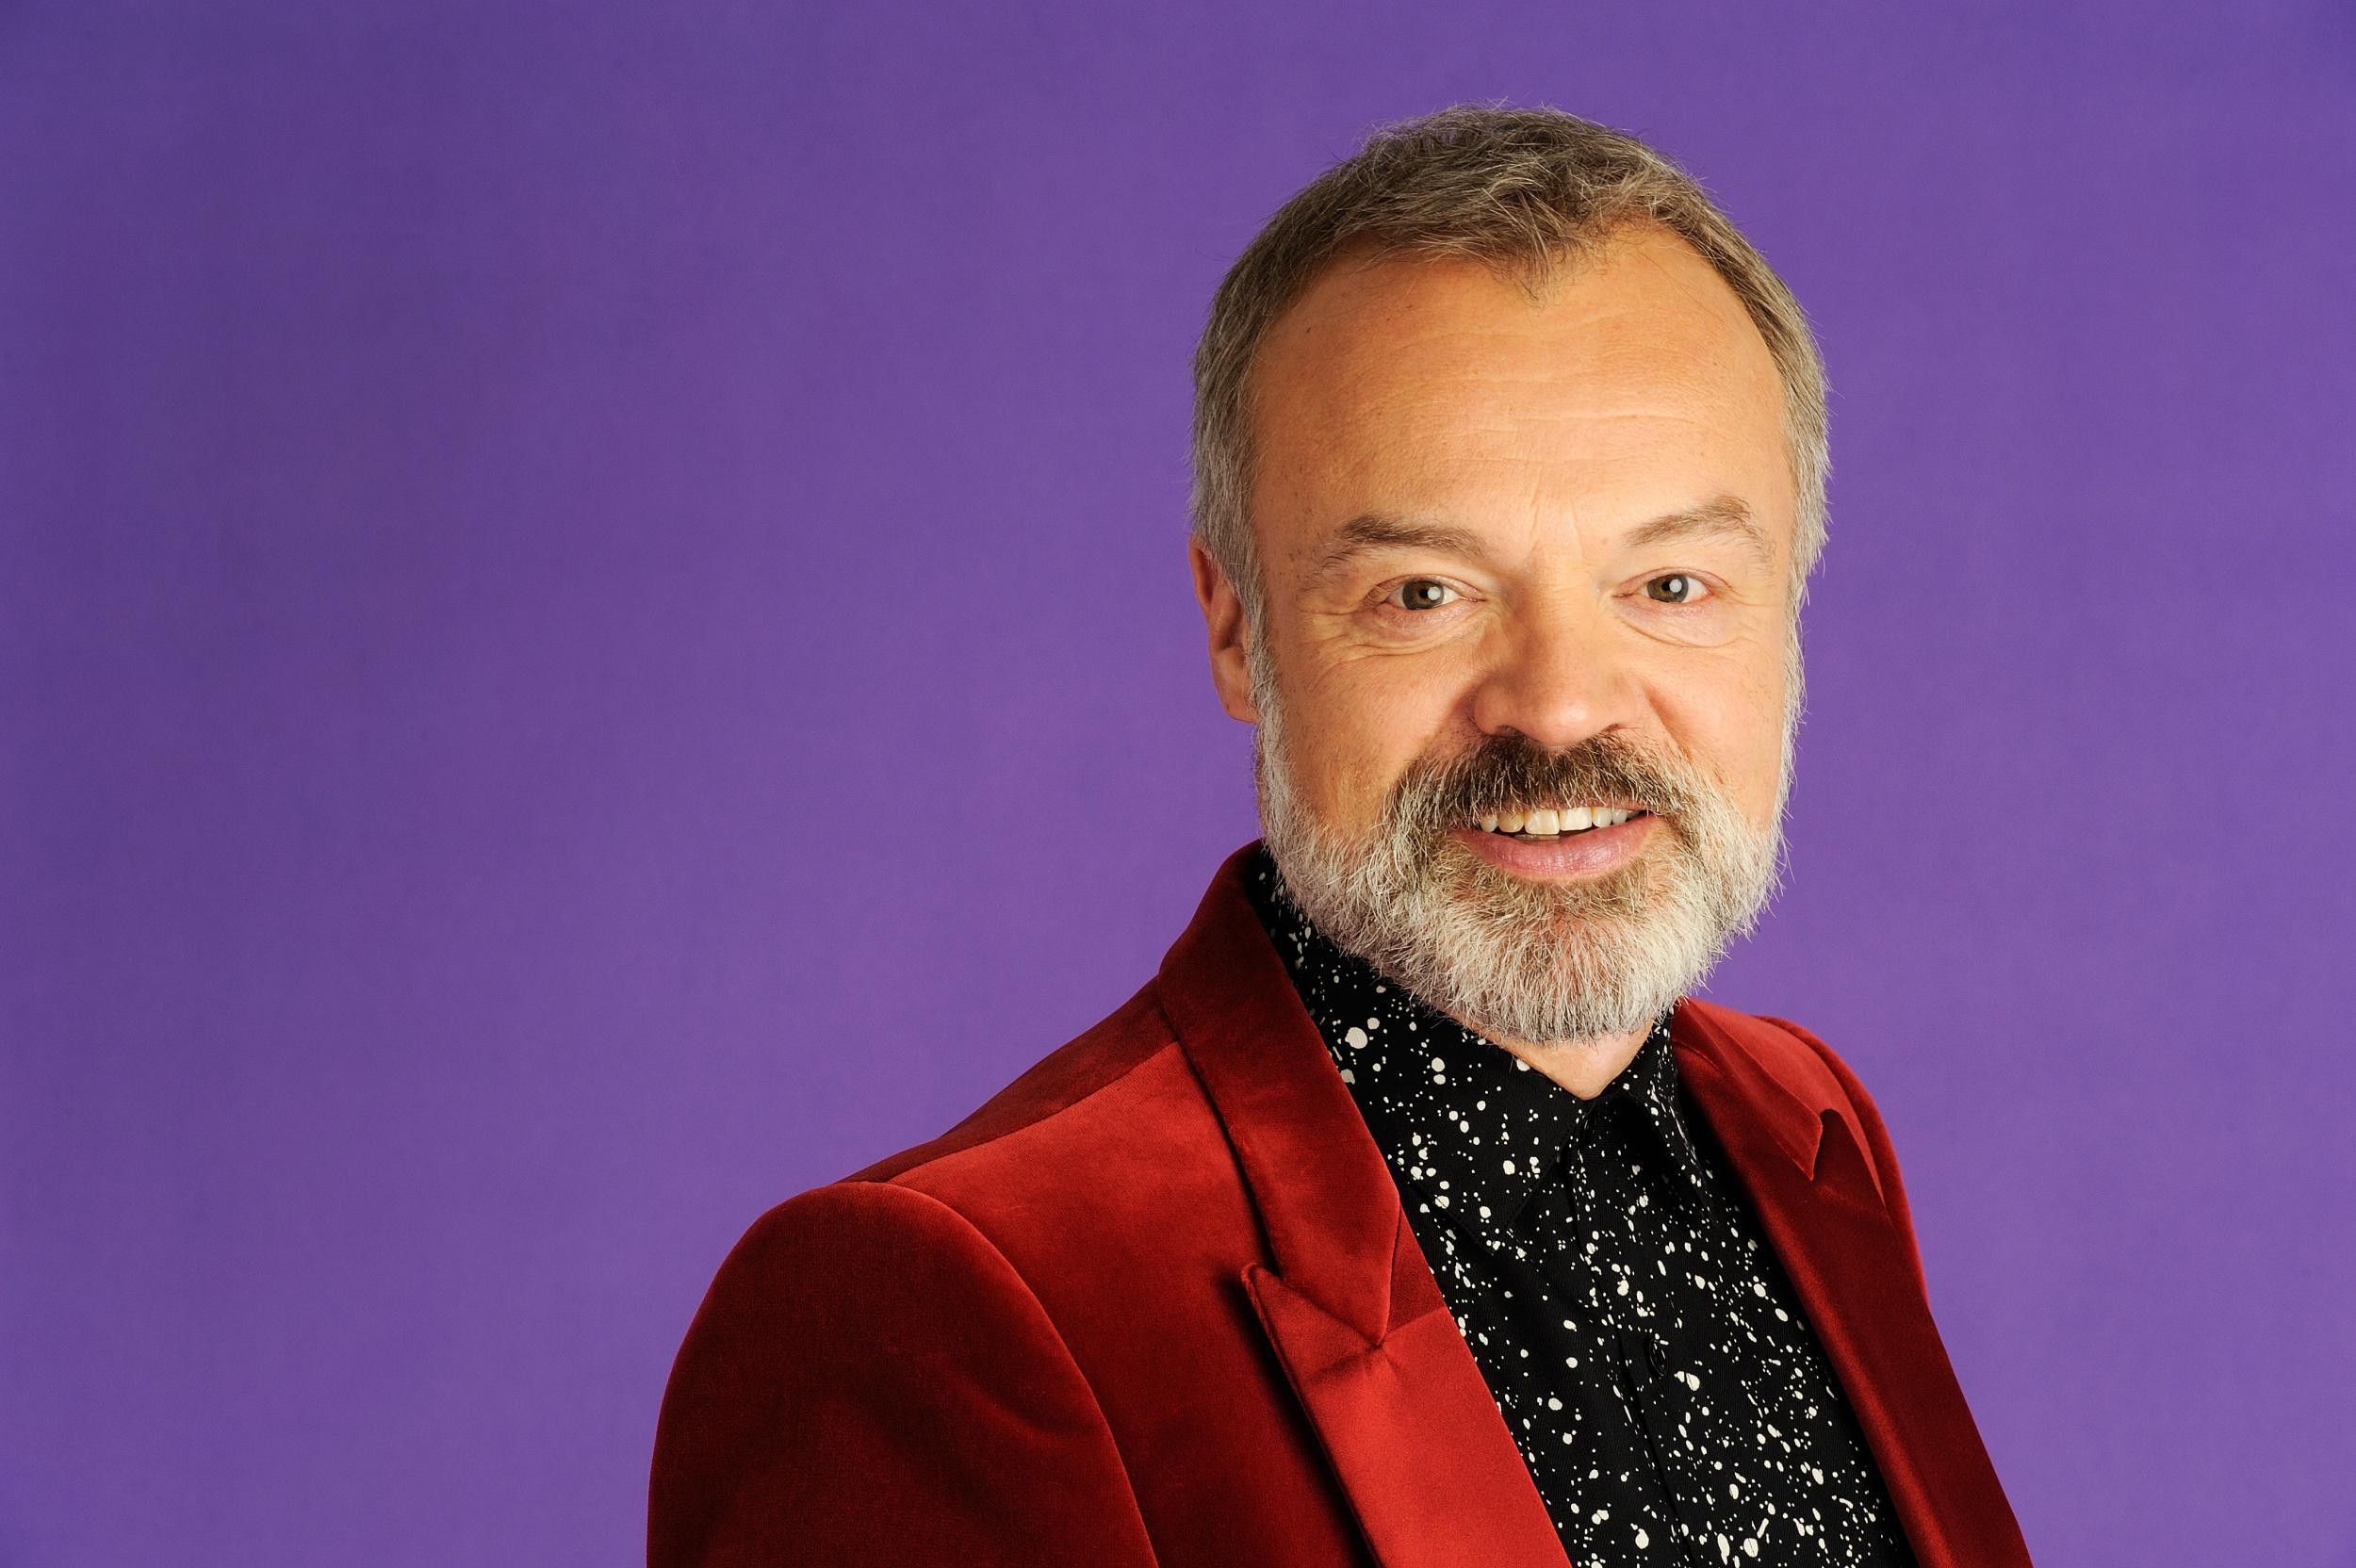 If you're not going out for New Year, some light banter from Graham Norton might be just the tonic